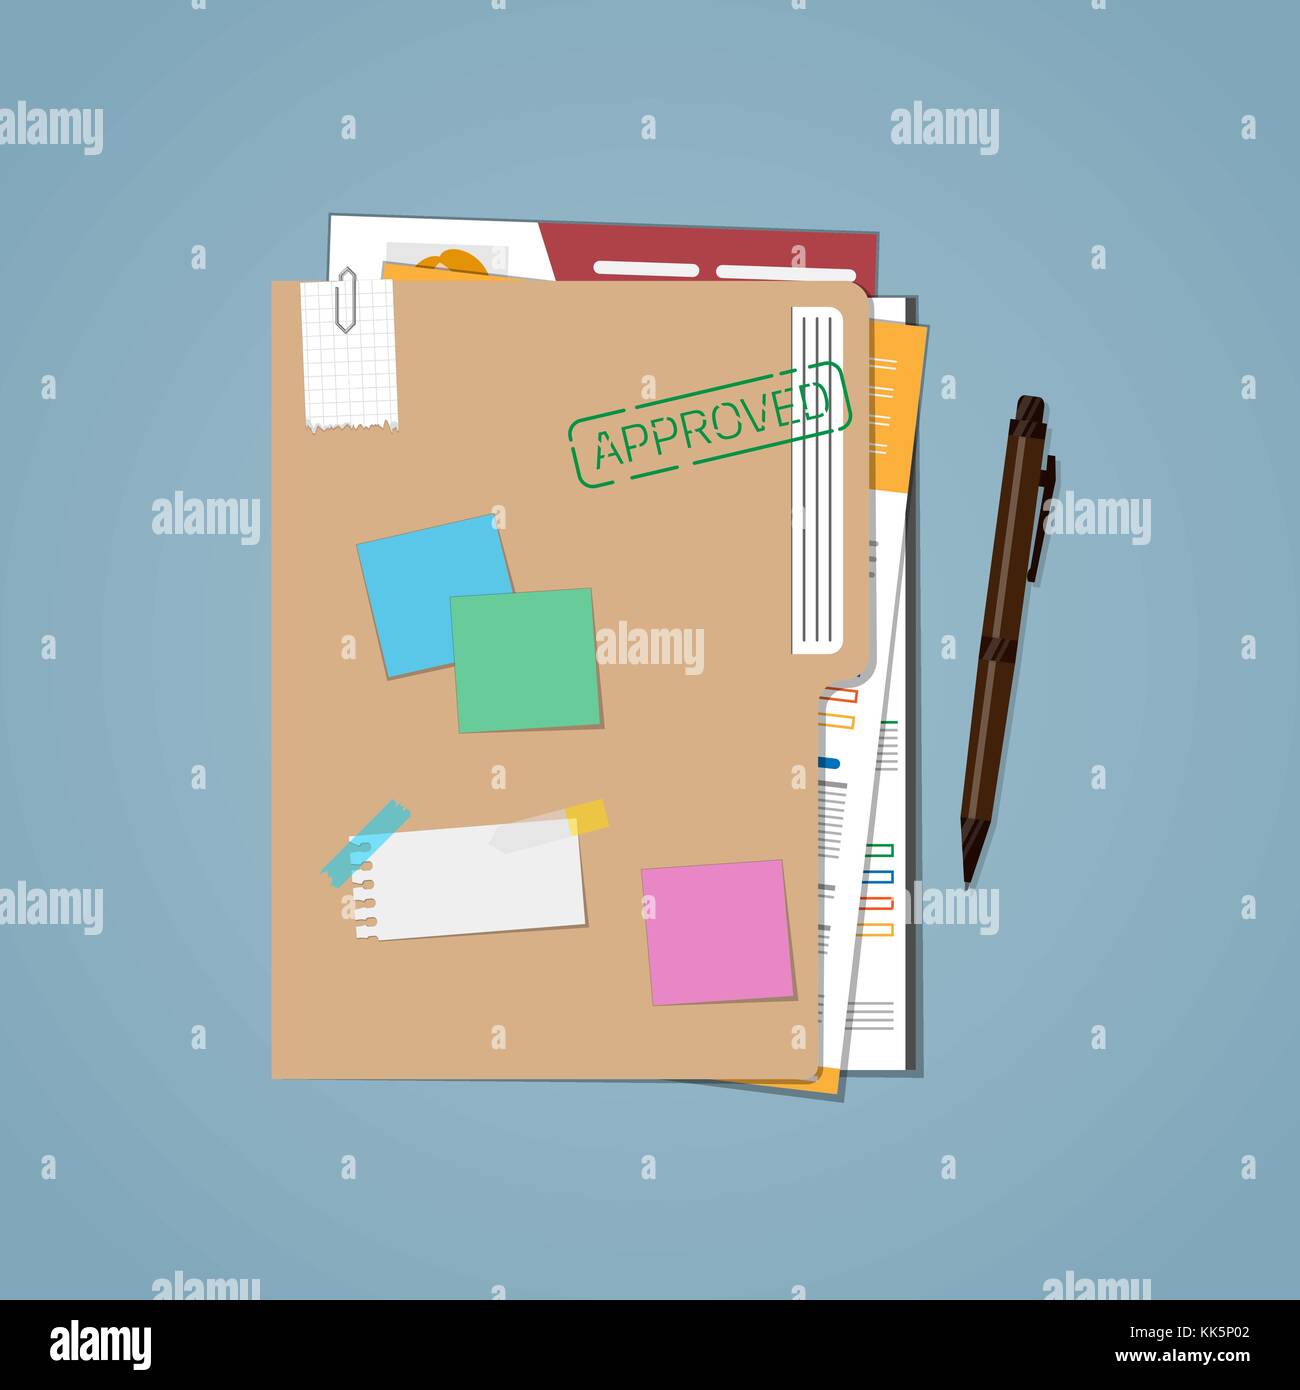 Folder approved resumes Stock Vector